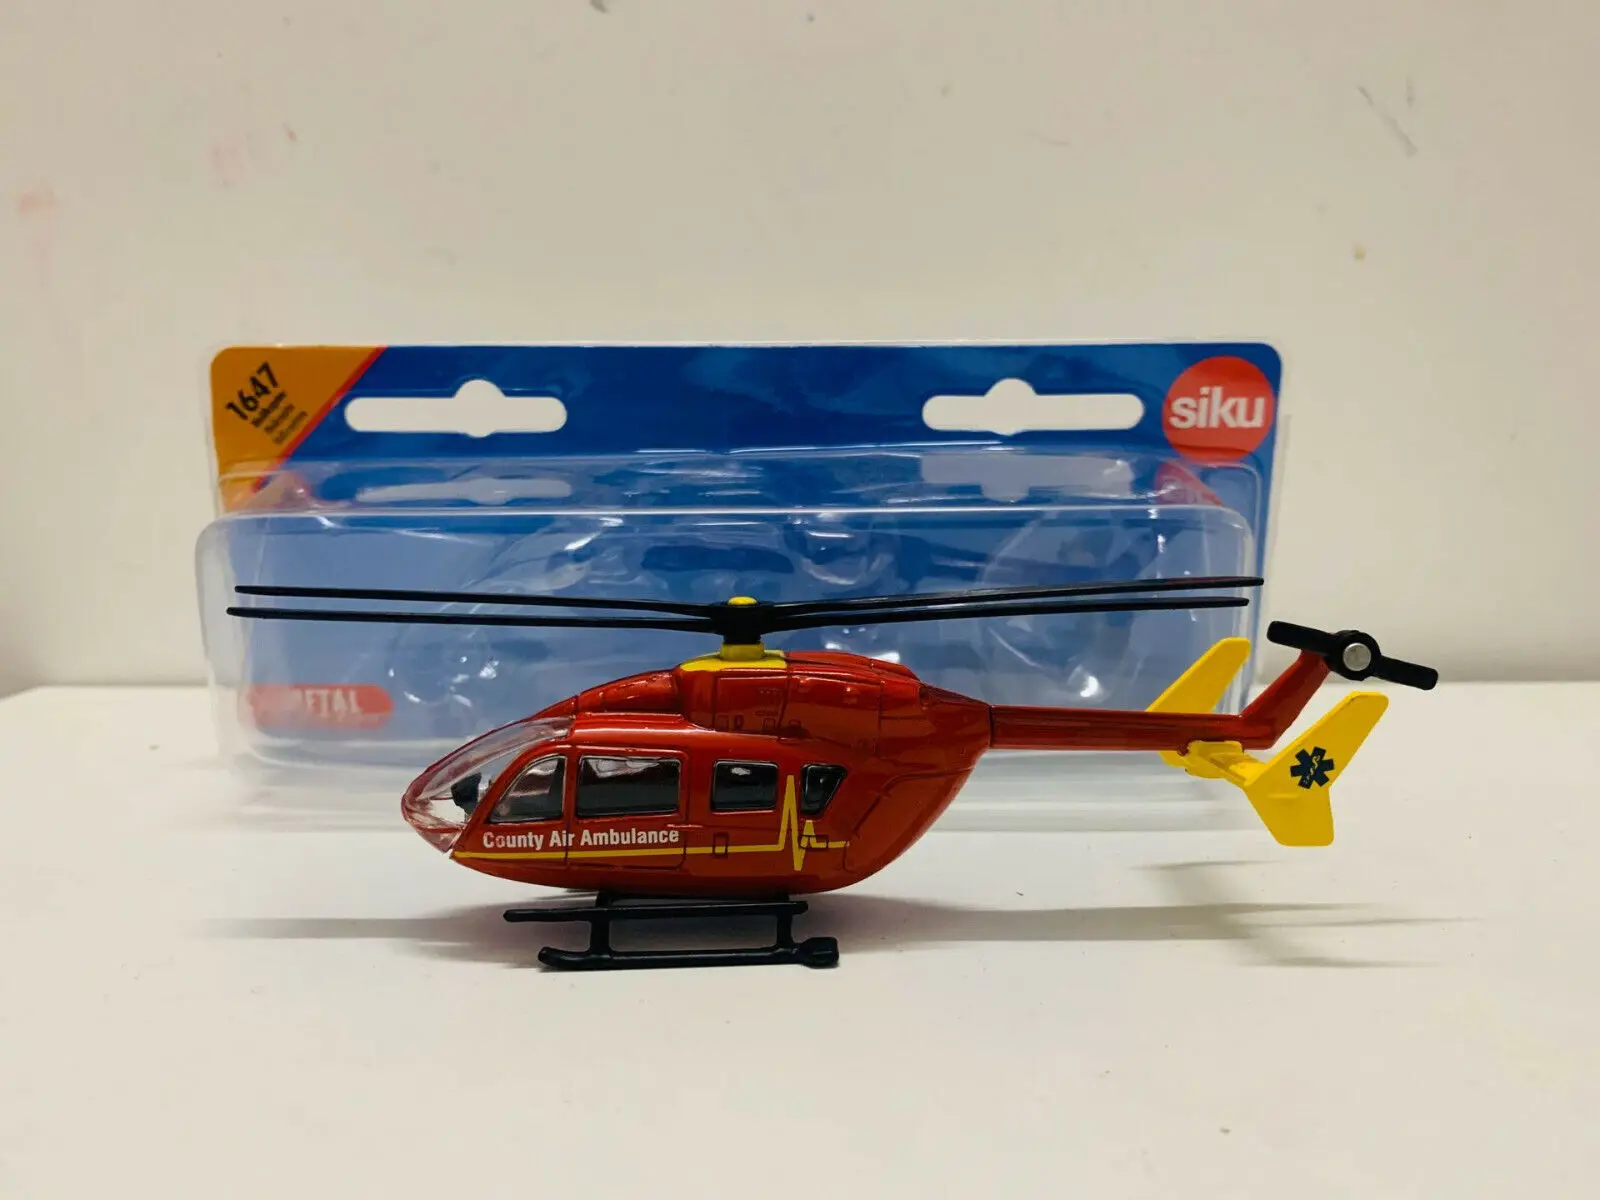 

Siku 1647 County Air Ambulance Helicopter 1/87 Scale Metal + Plastic Parts Gift